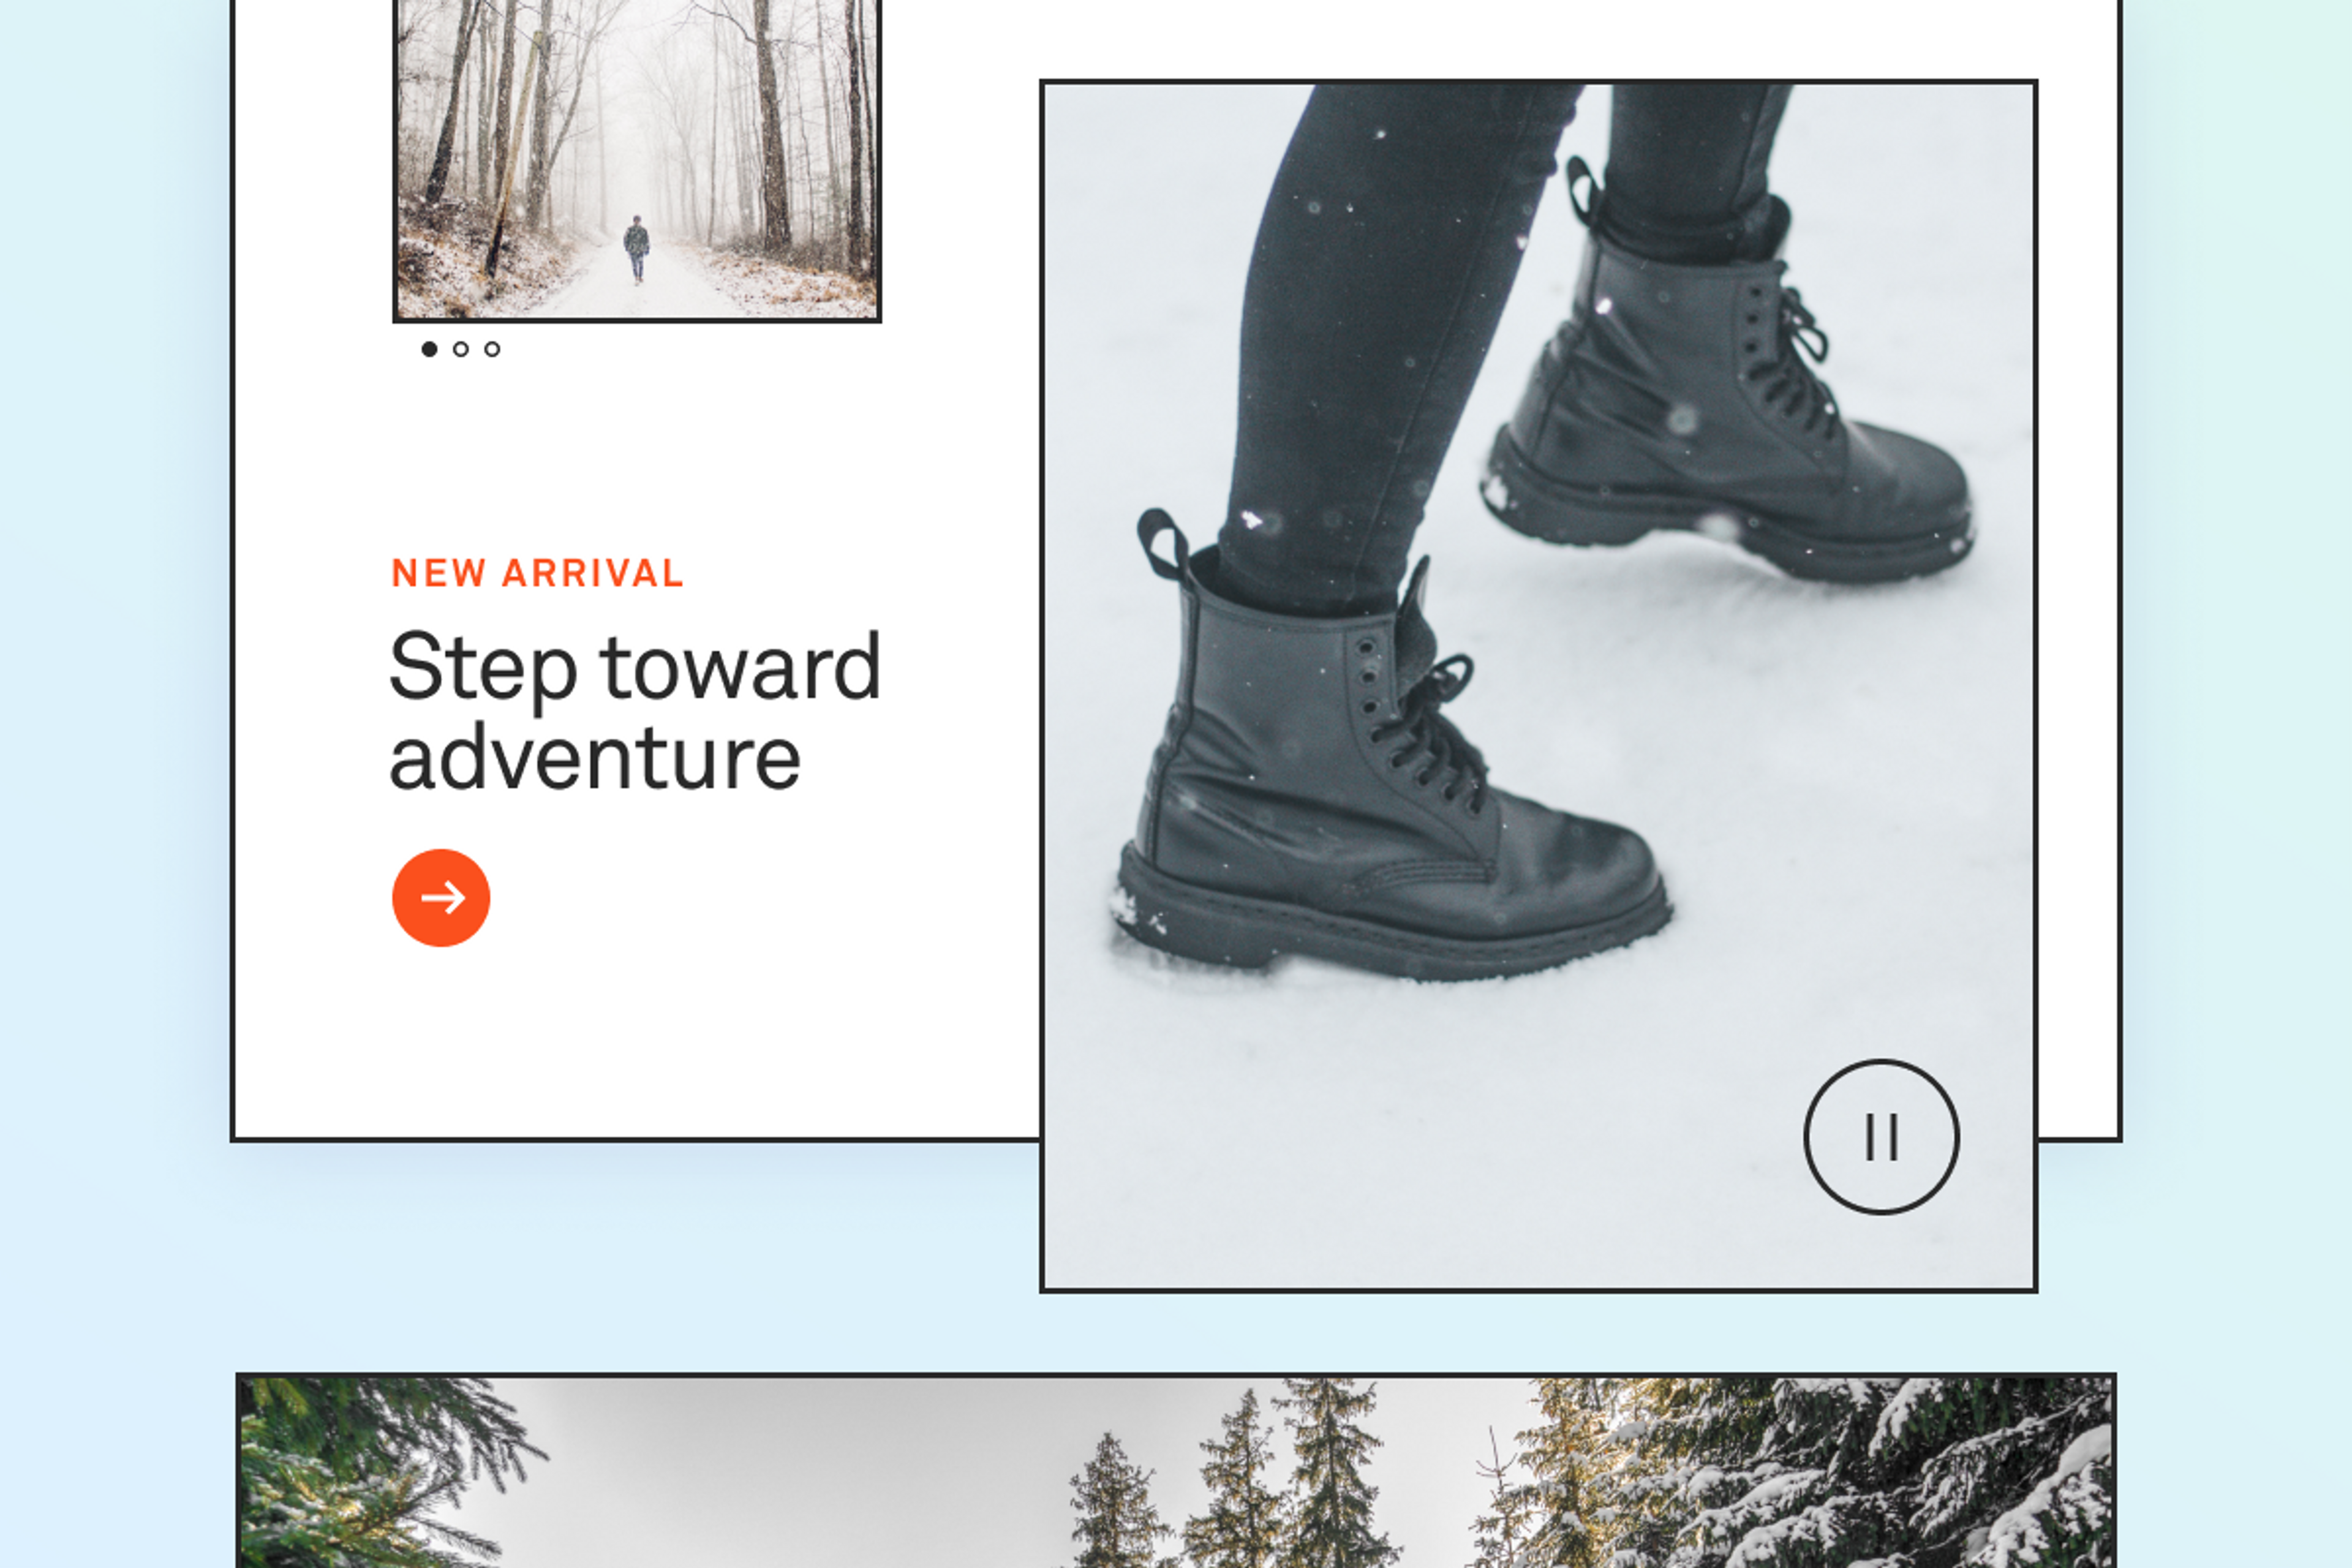 A product shot of black boots walking in the snow, with the text "New Arrival: Step toward adventure" and an "Explore" button